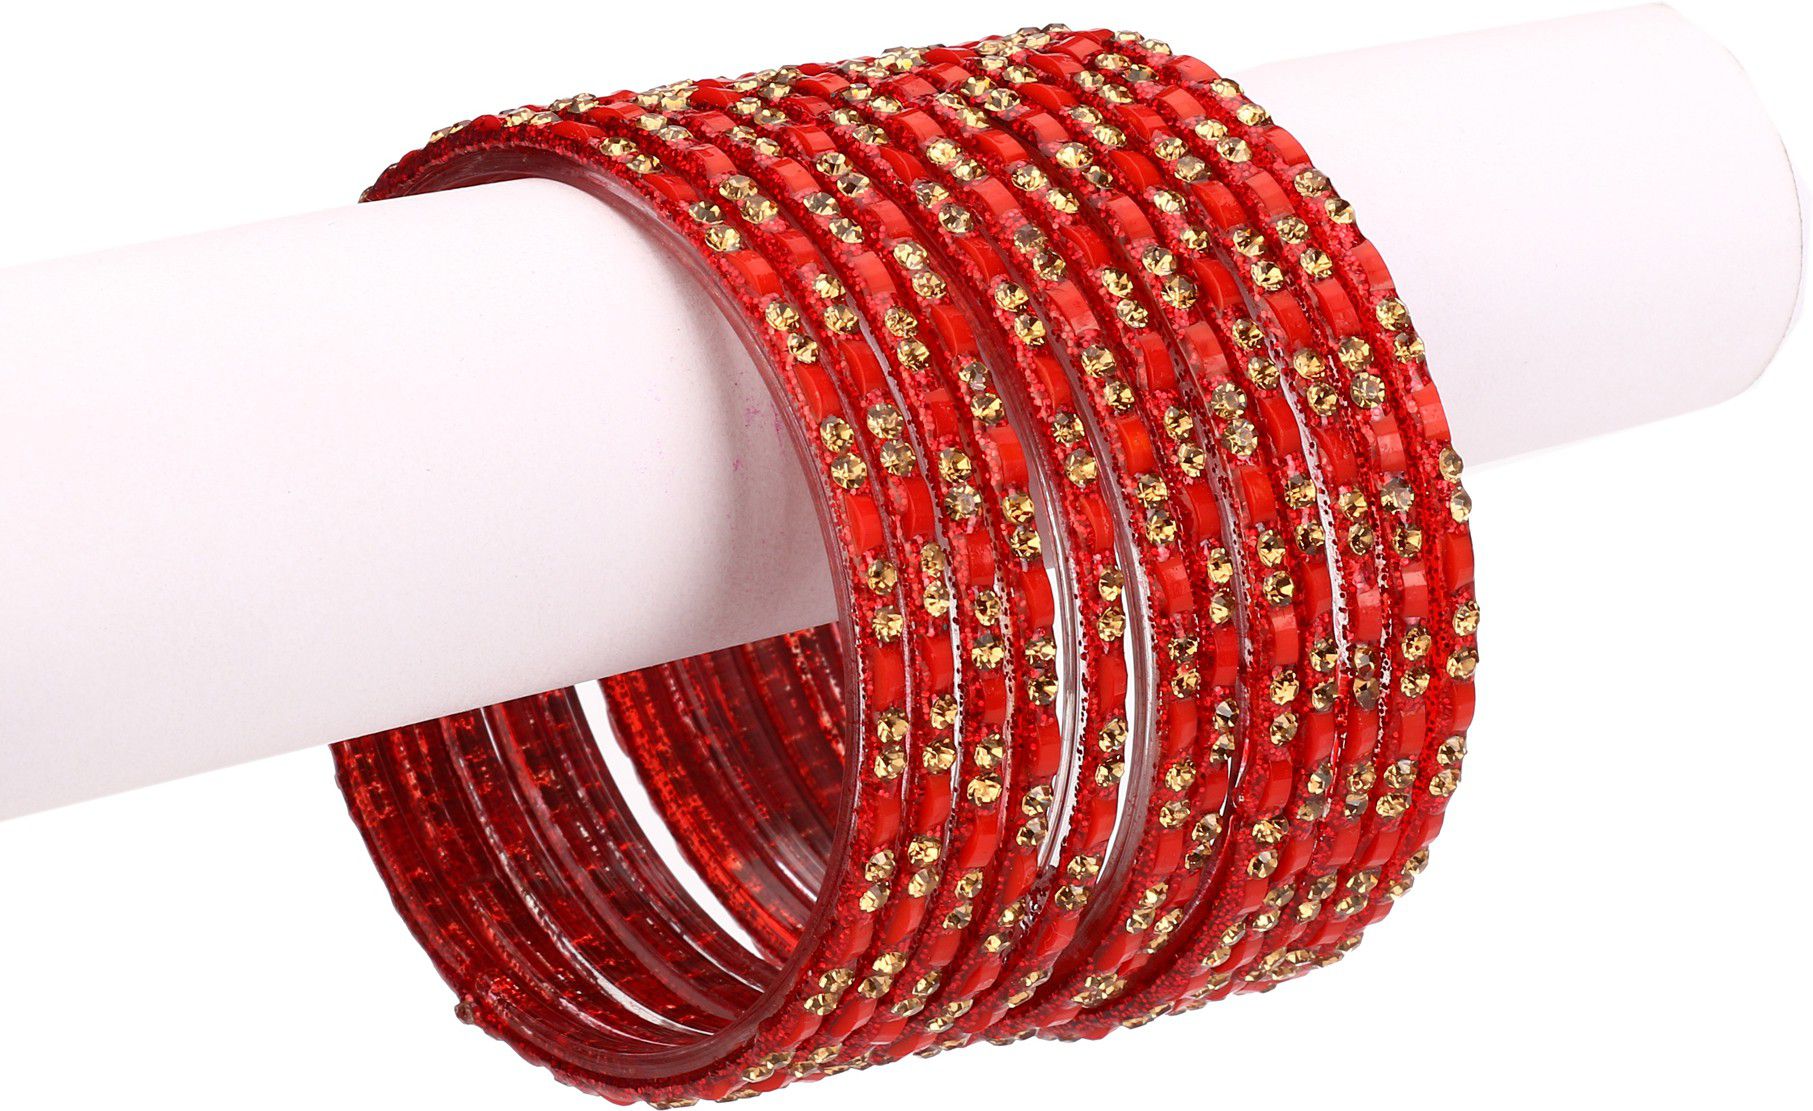     			Somil 12 Red Glass Bangle Party Set Fully Ornamented With Colorful Beads & Crystal With Safety Box-ED_2.6